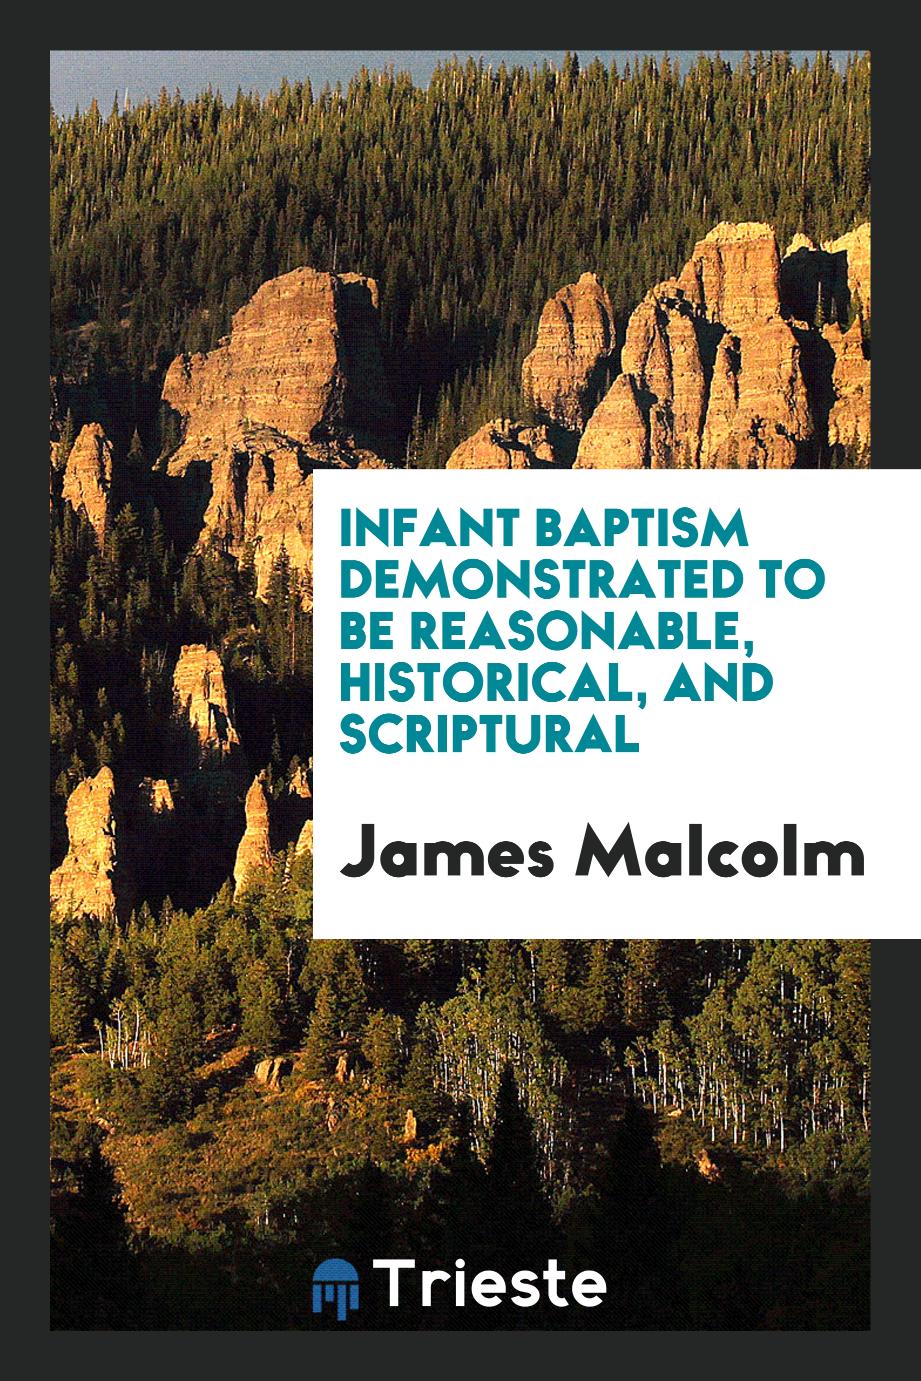 Infant Baptism Demonstrated to Be Reasonable, Historical, and Scriptural